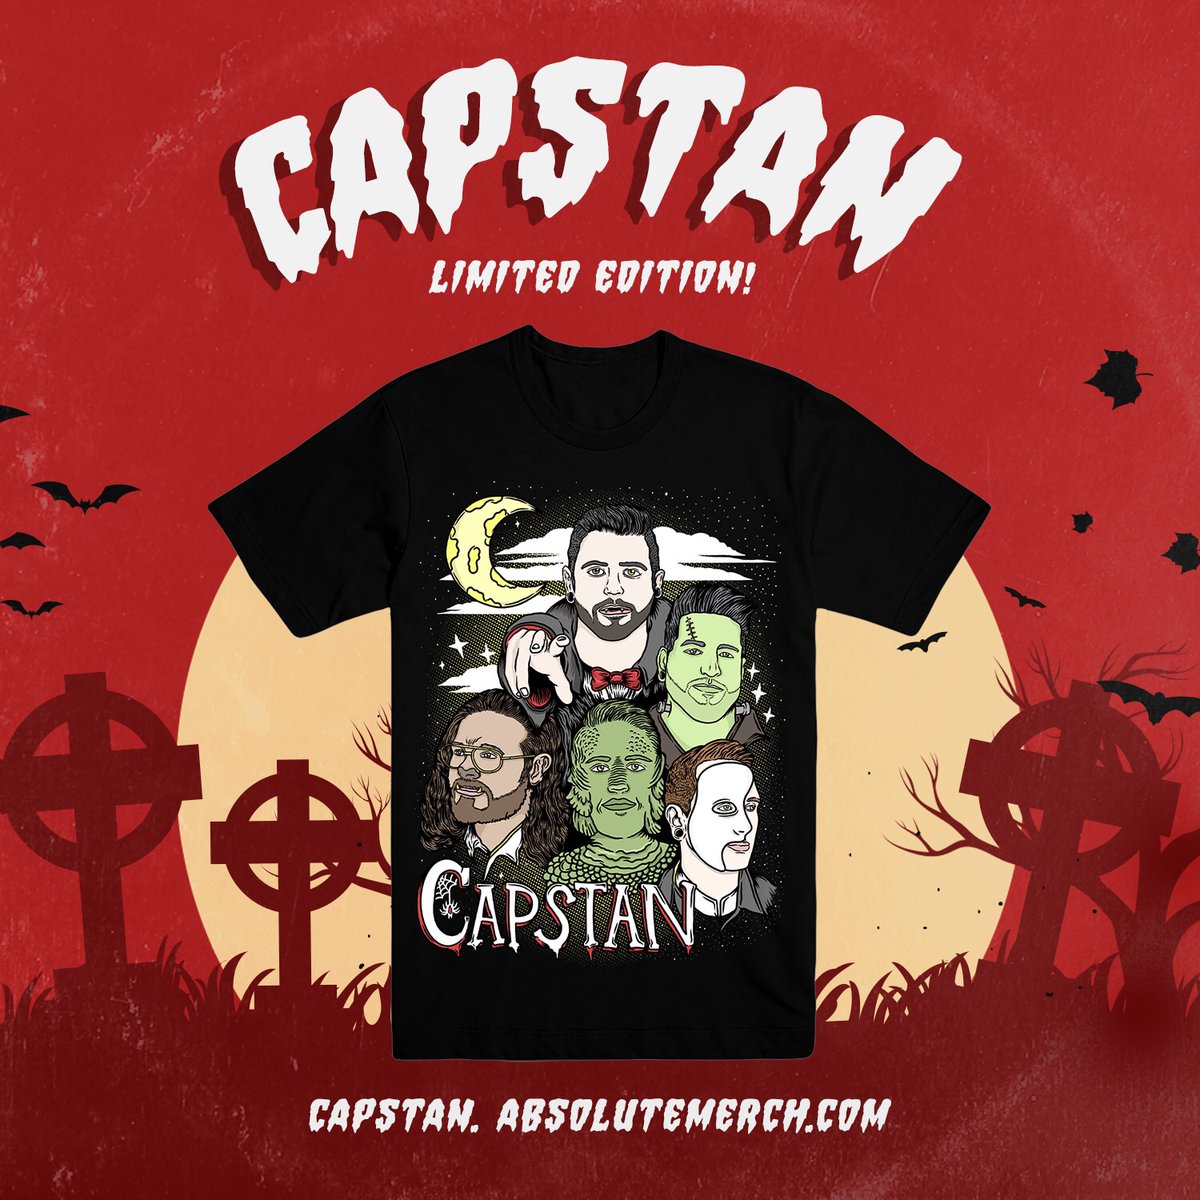 Snag our exclusive Halloween shirt from 
@AbsoluteMerch...before it’s too late! 👻😱👻

capstan.absolutemerch.com